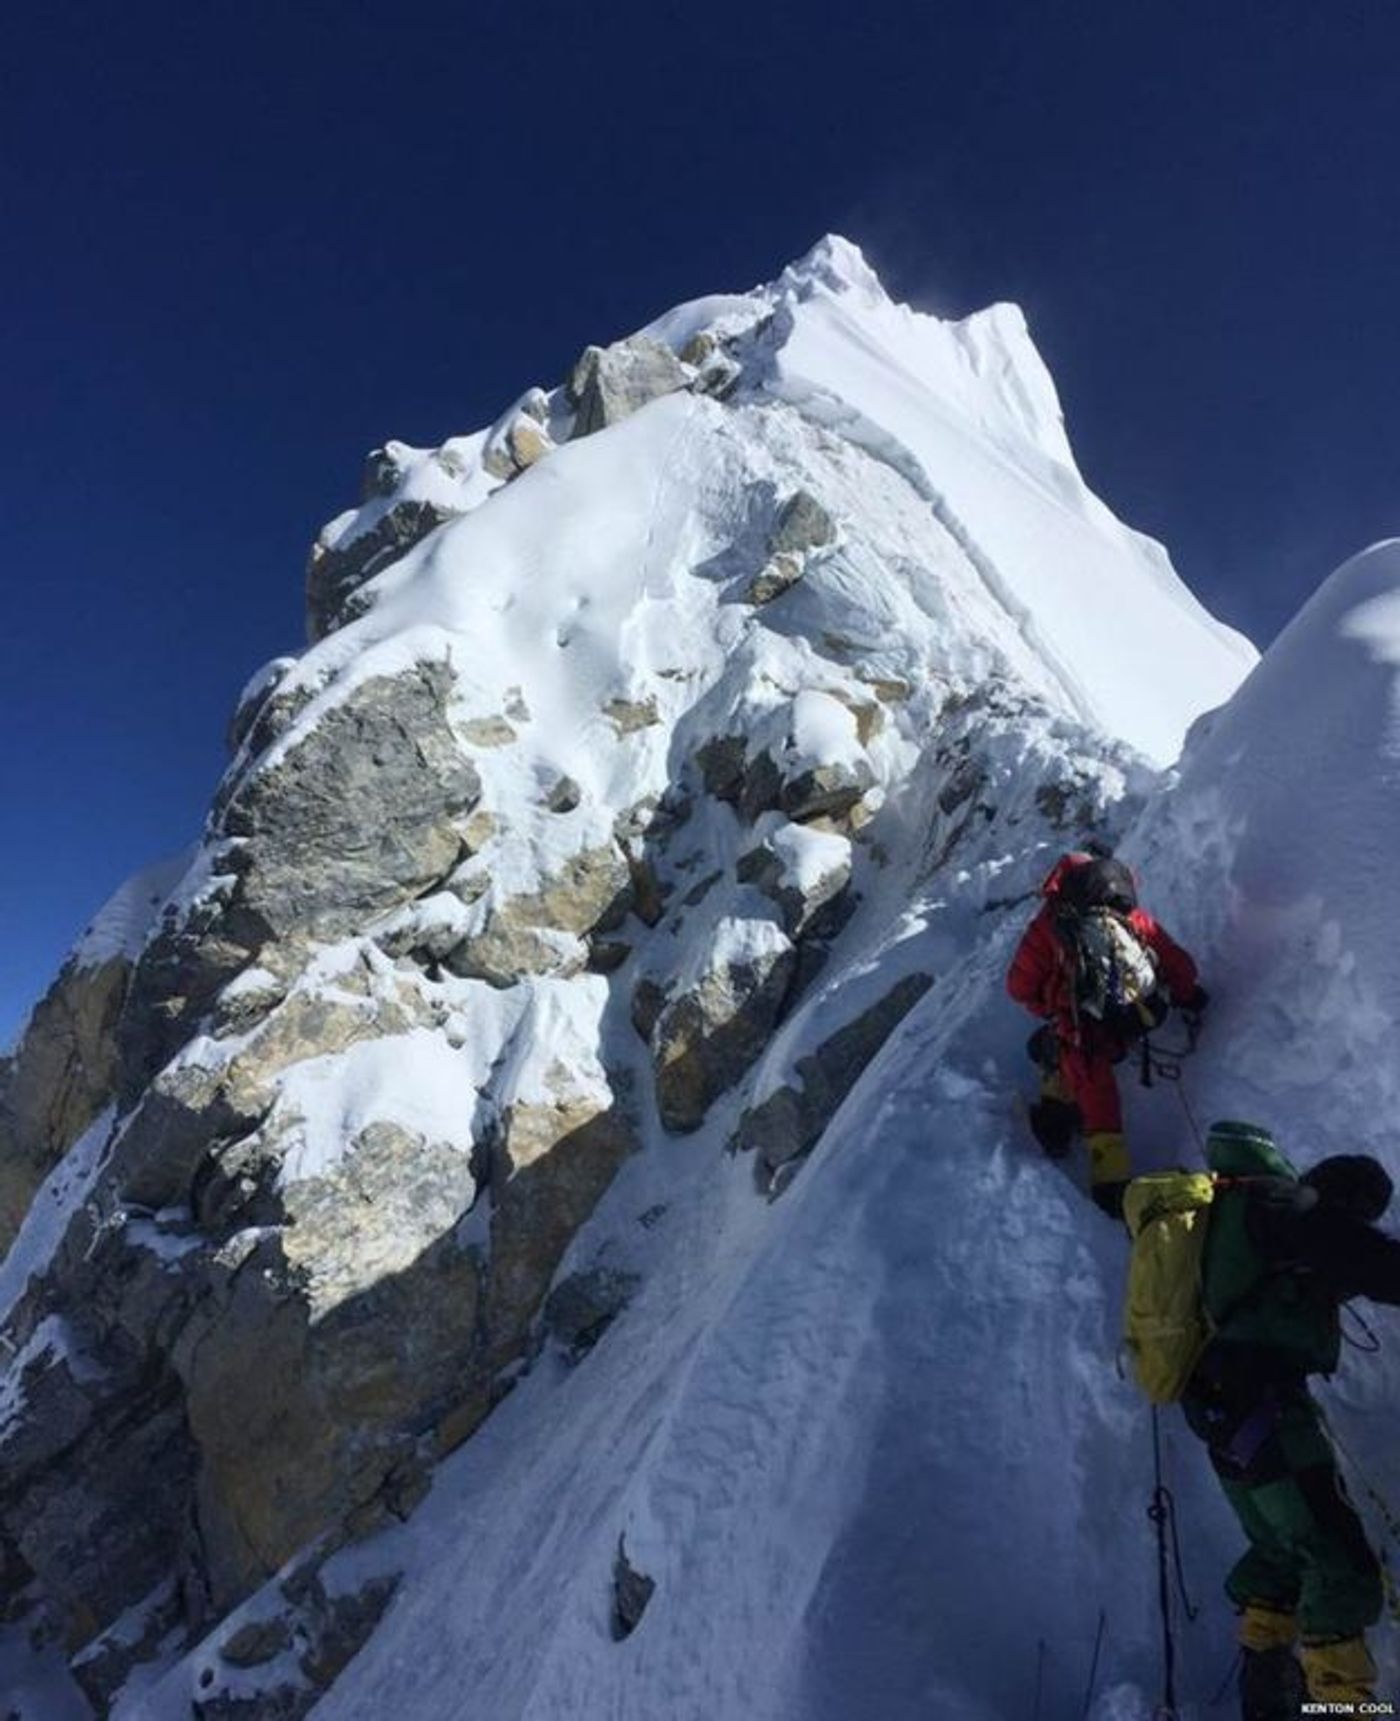 British mountaineer Kenton Cool took this photo of the Step last year, he said it looked "different". Photo: Kenton Cool